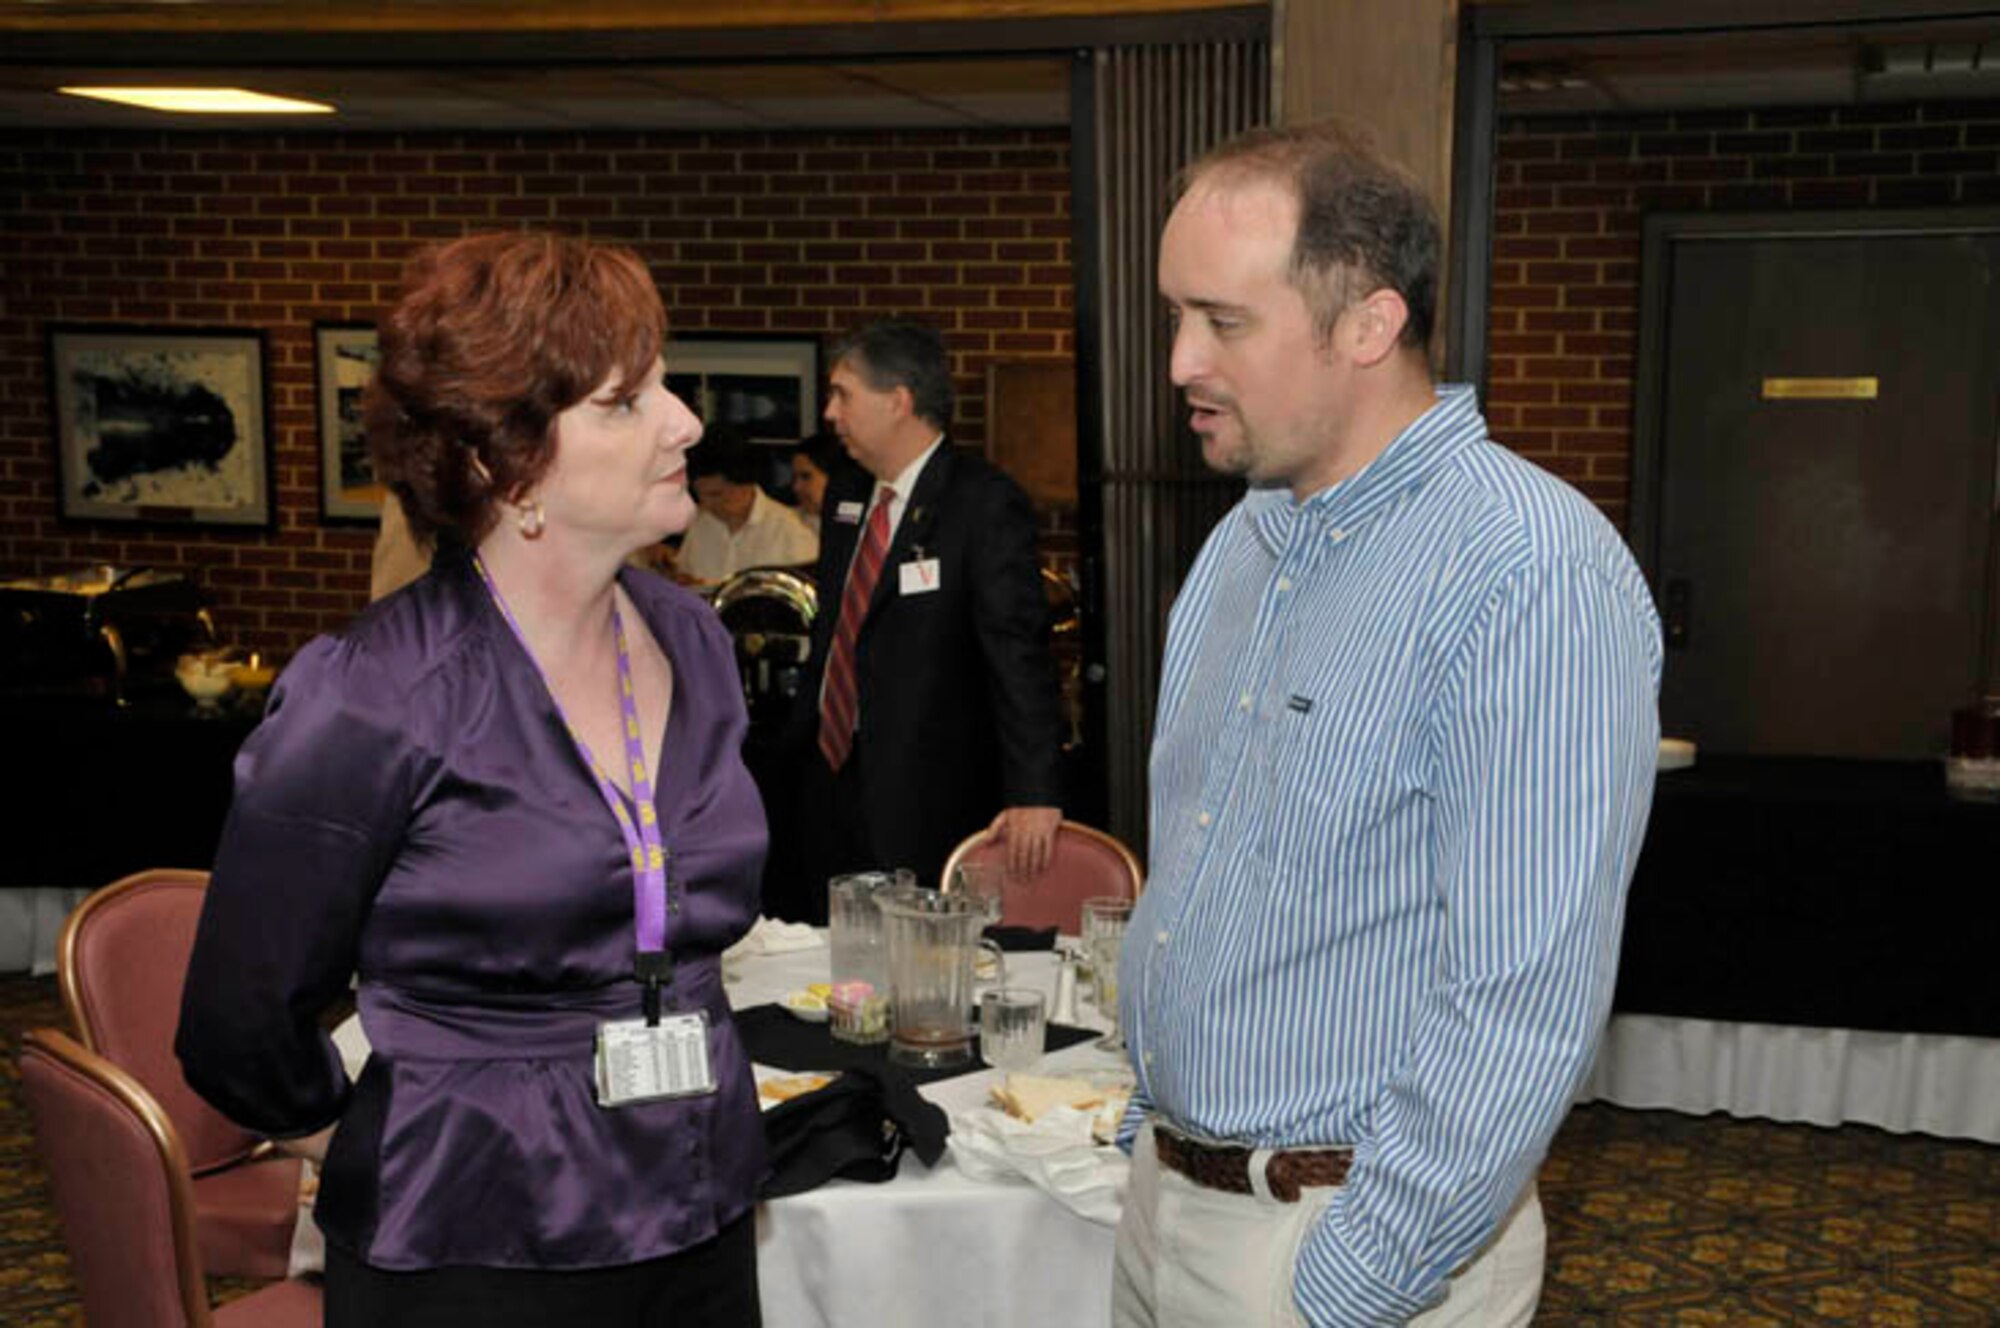 (From right) Chris Davis (TTU class of 2000), a computer programmer in Aerospace Testing Alliance’s (ATA) technology department discusses the support contractor’s college internship program with ATA Deputy Director of the Project and Design Engineering Department Sharon Carter (TTU Class of 1986) during the TTU alumni luncheon Wednesday. (Photo by Rick Goodfriend)